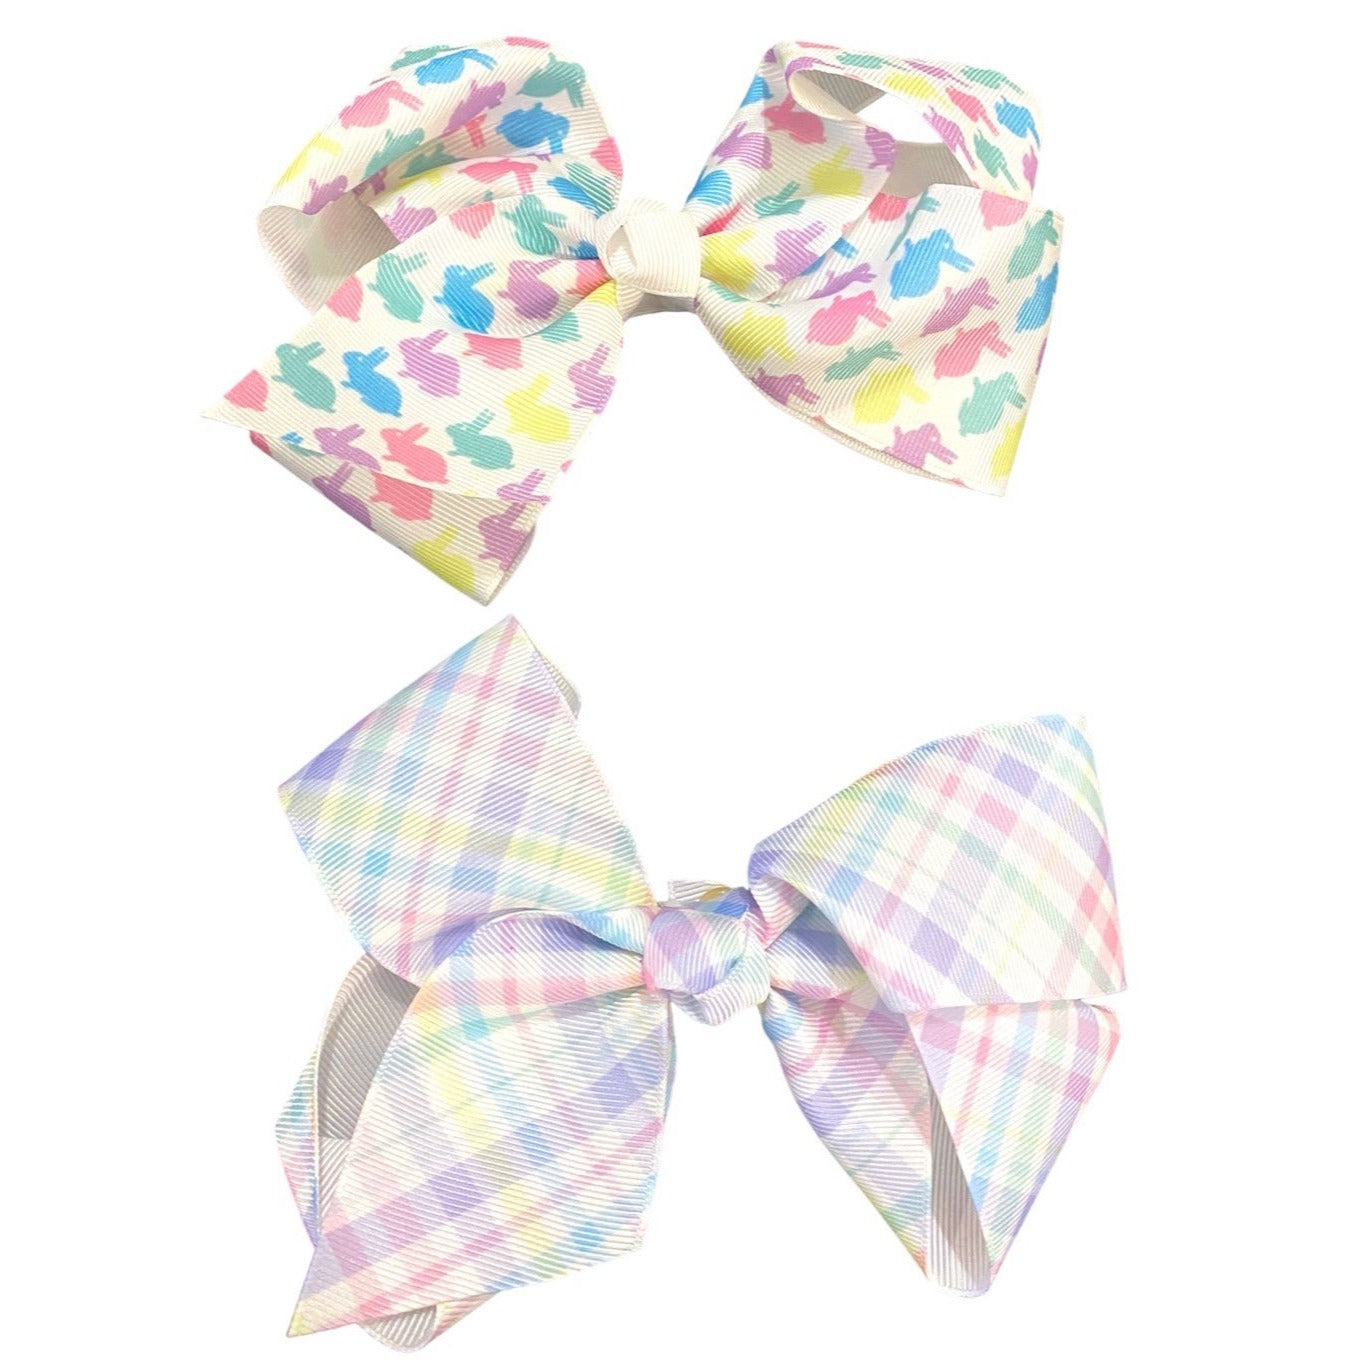 New Easter bunny and spring plaid bow bundle 6”